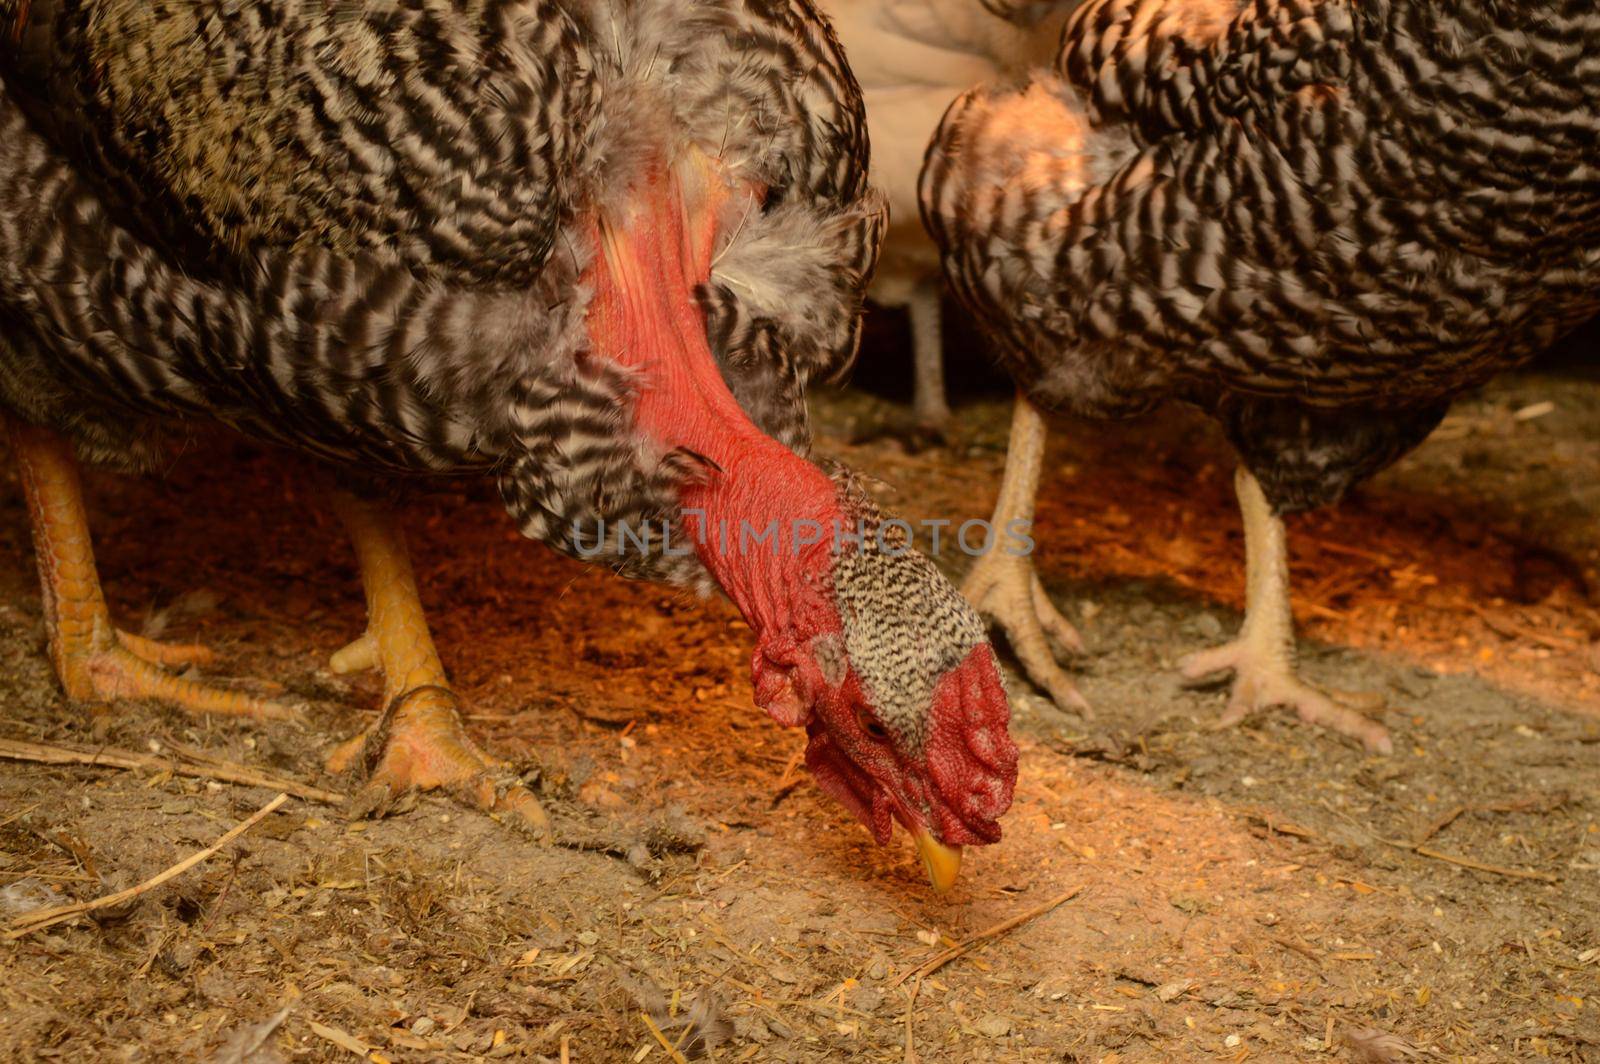 A closeup view of some domestic Turkens inside the chicken coop.